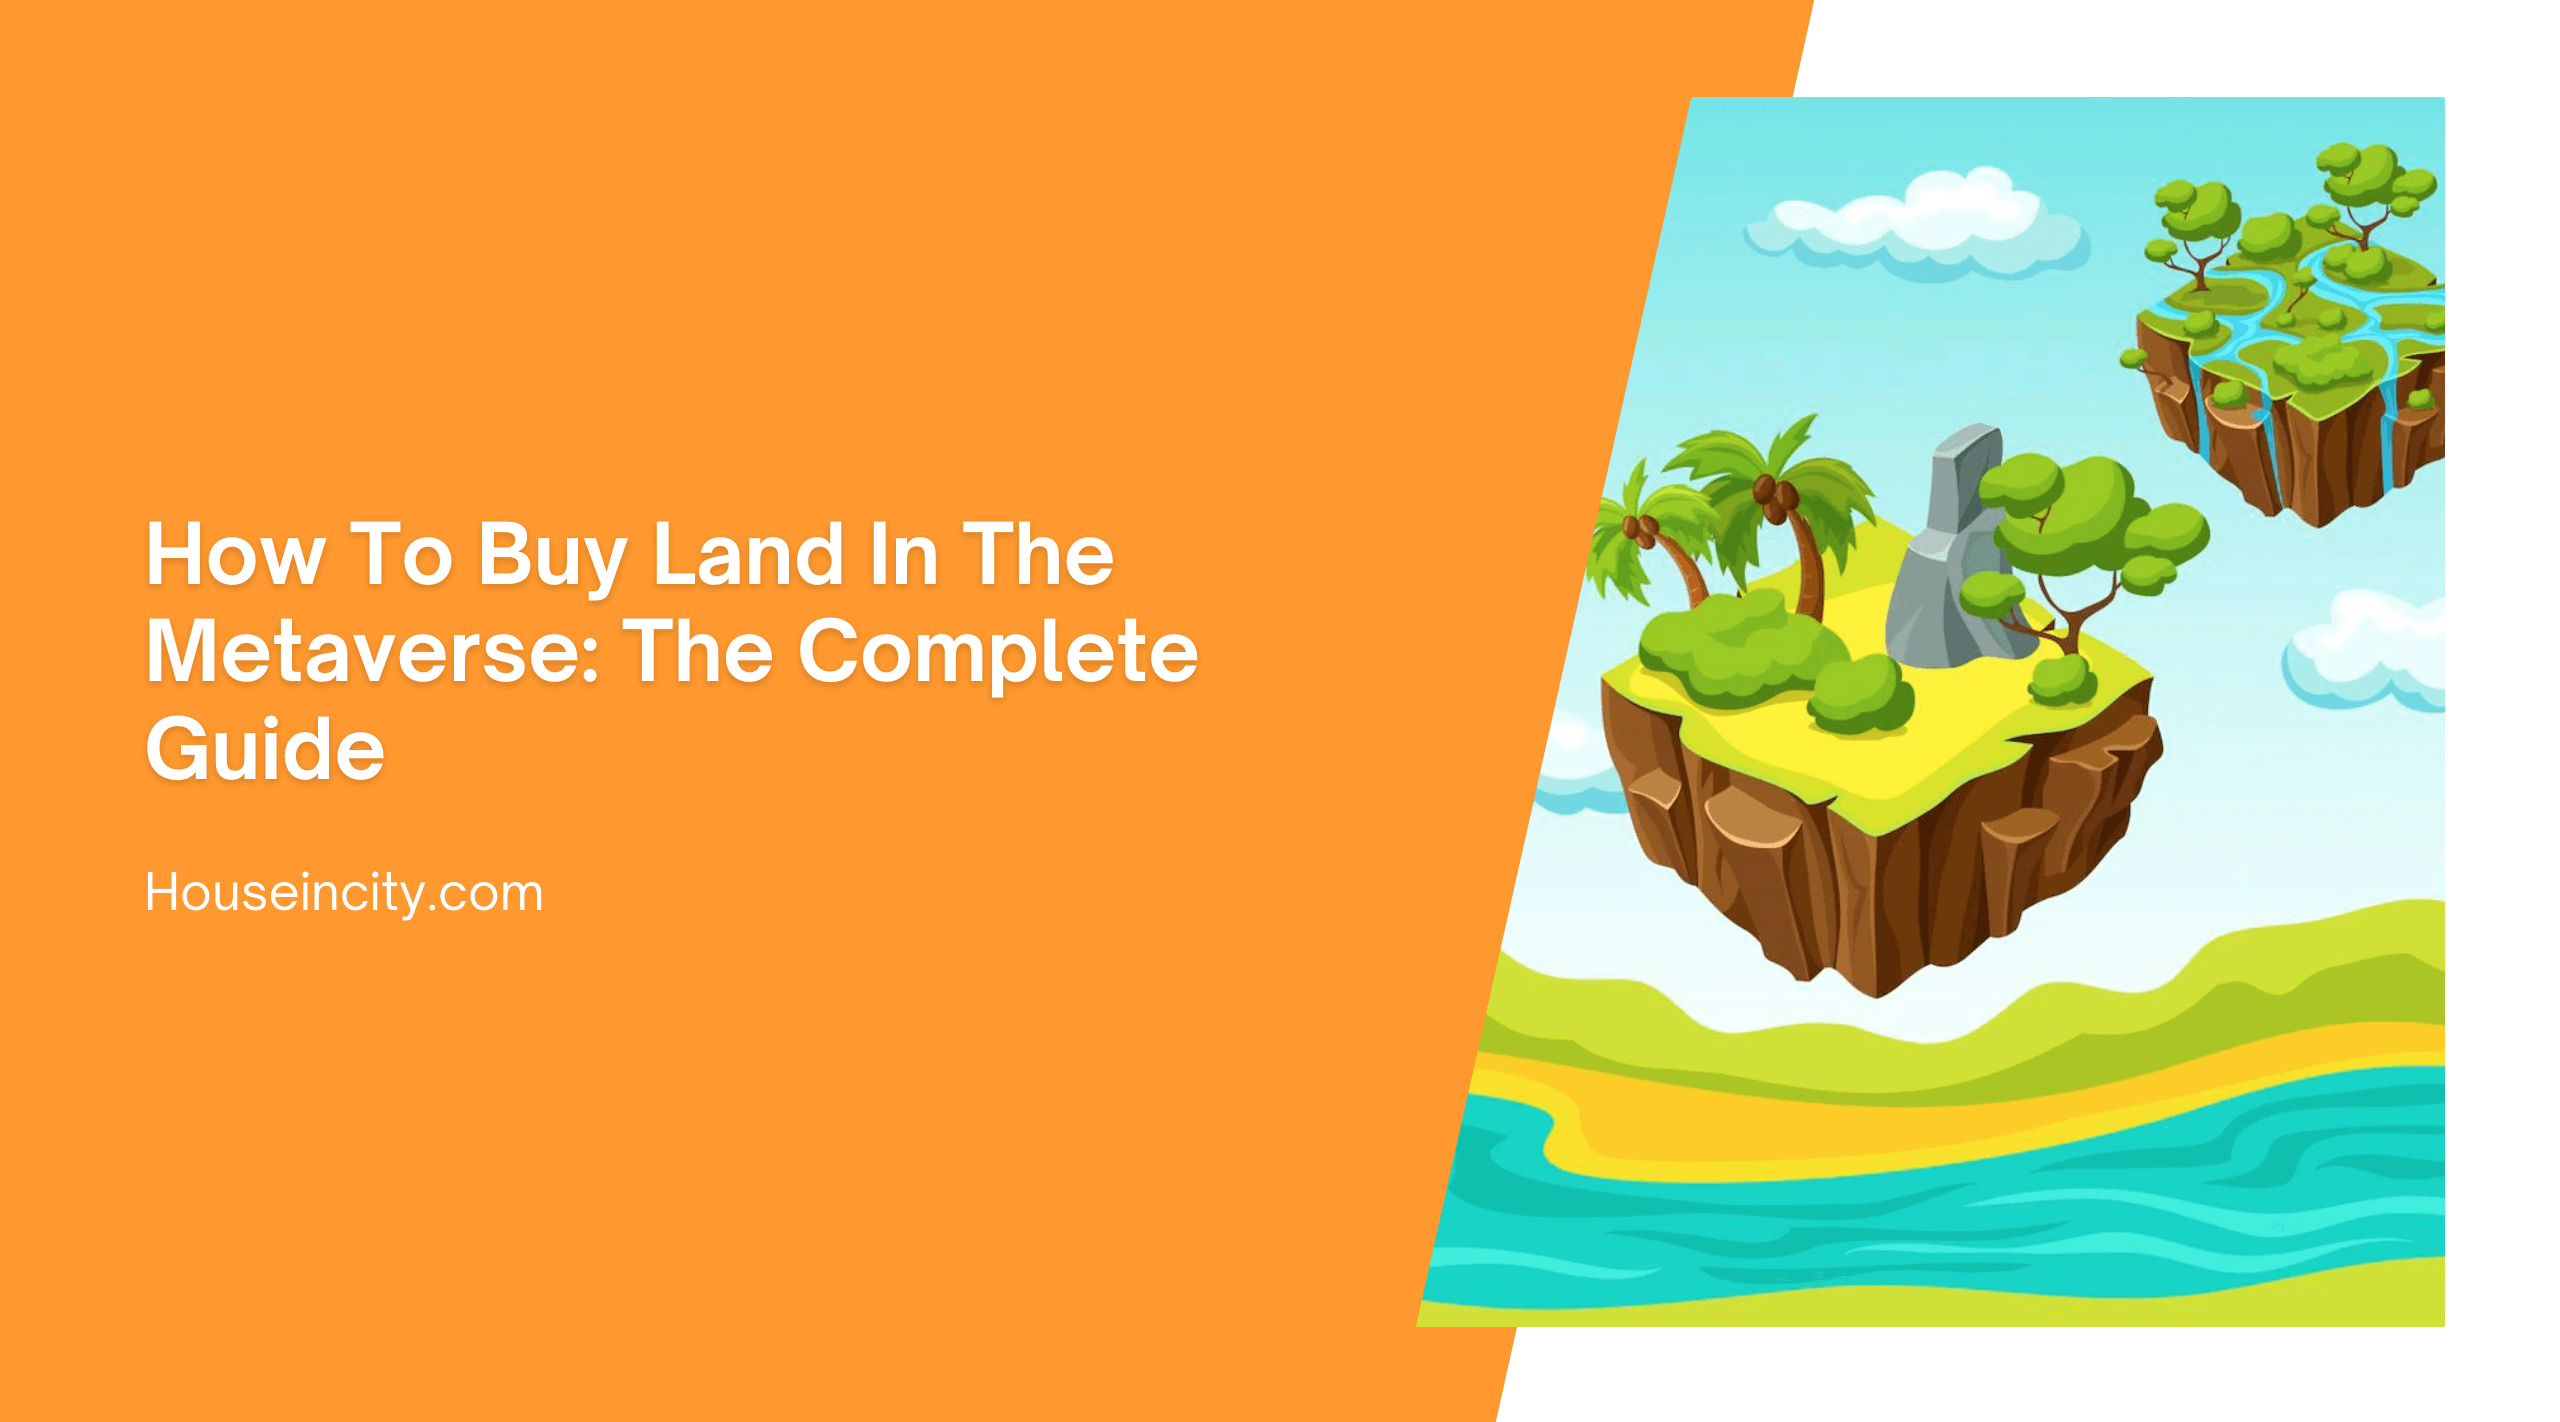 How To Buy Land In The Metaverse: The Complete Guide